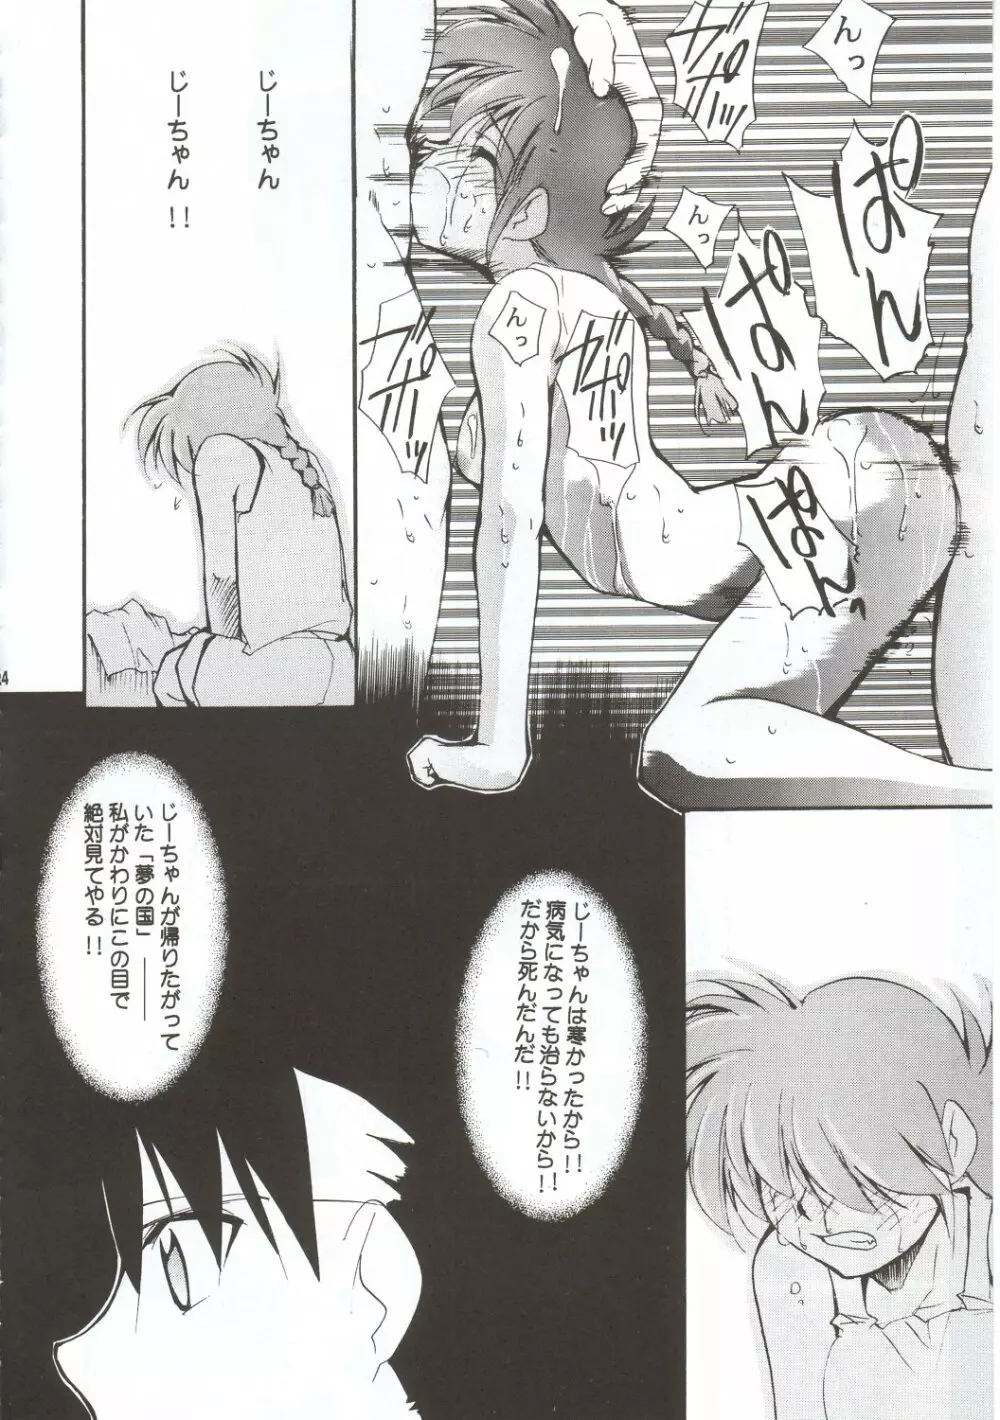 RANMA1/2 WORKS 3 Page.23